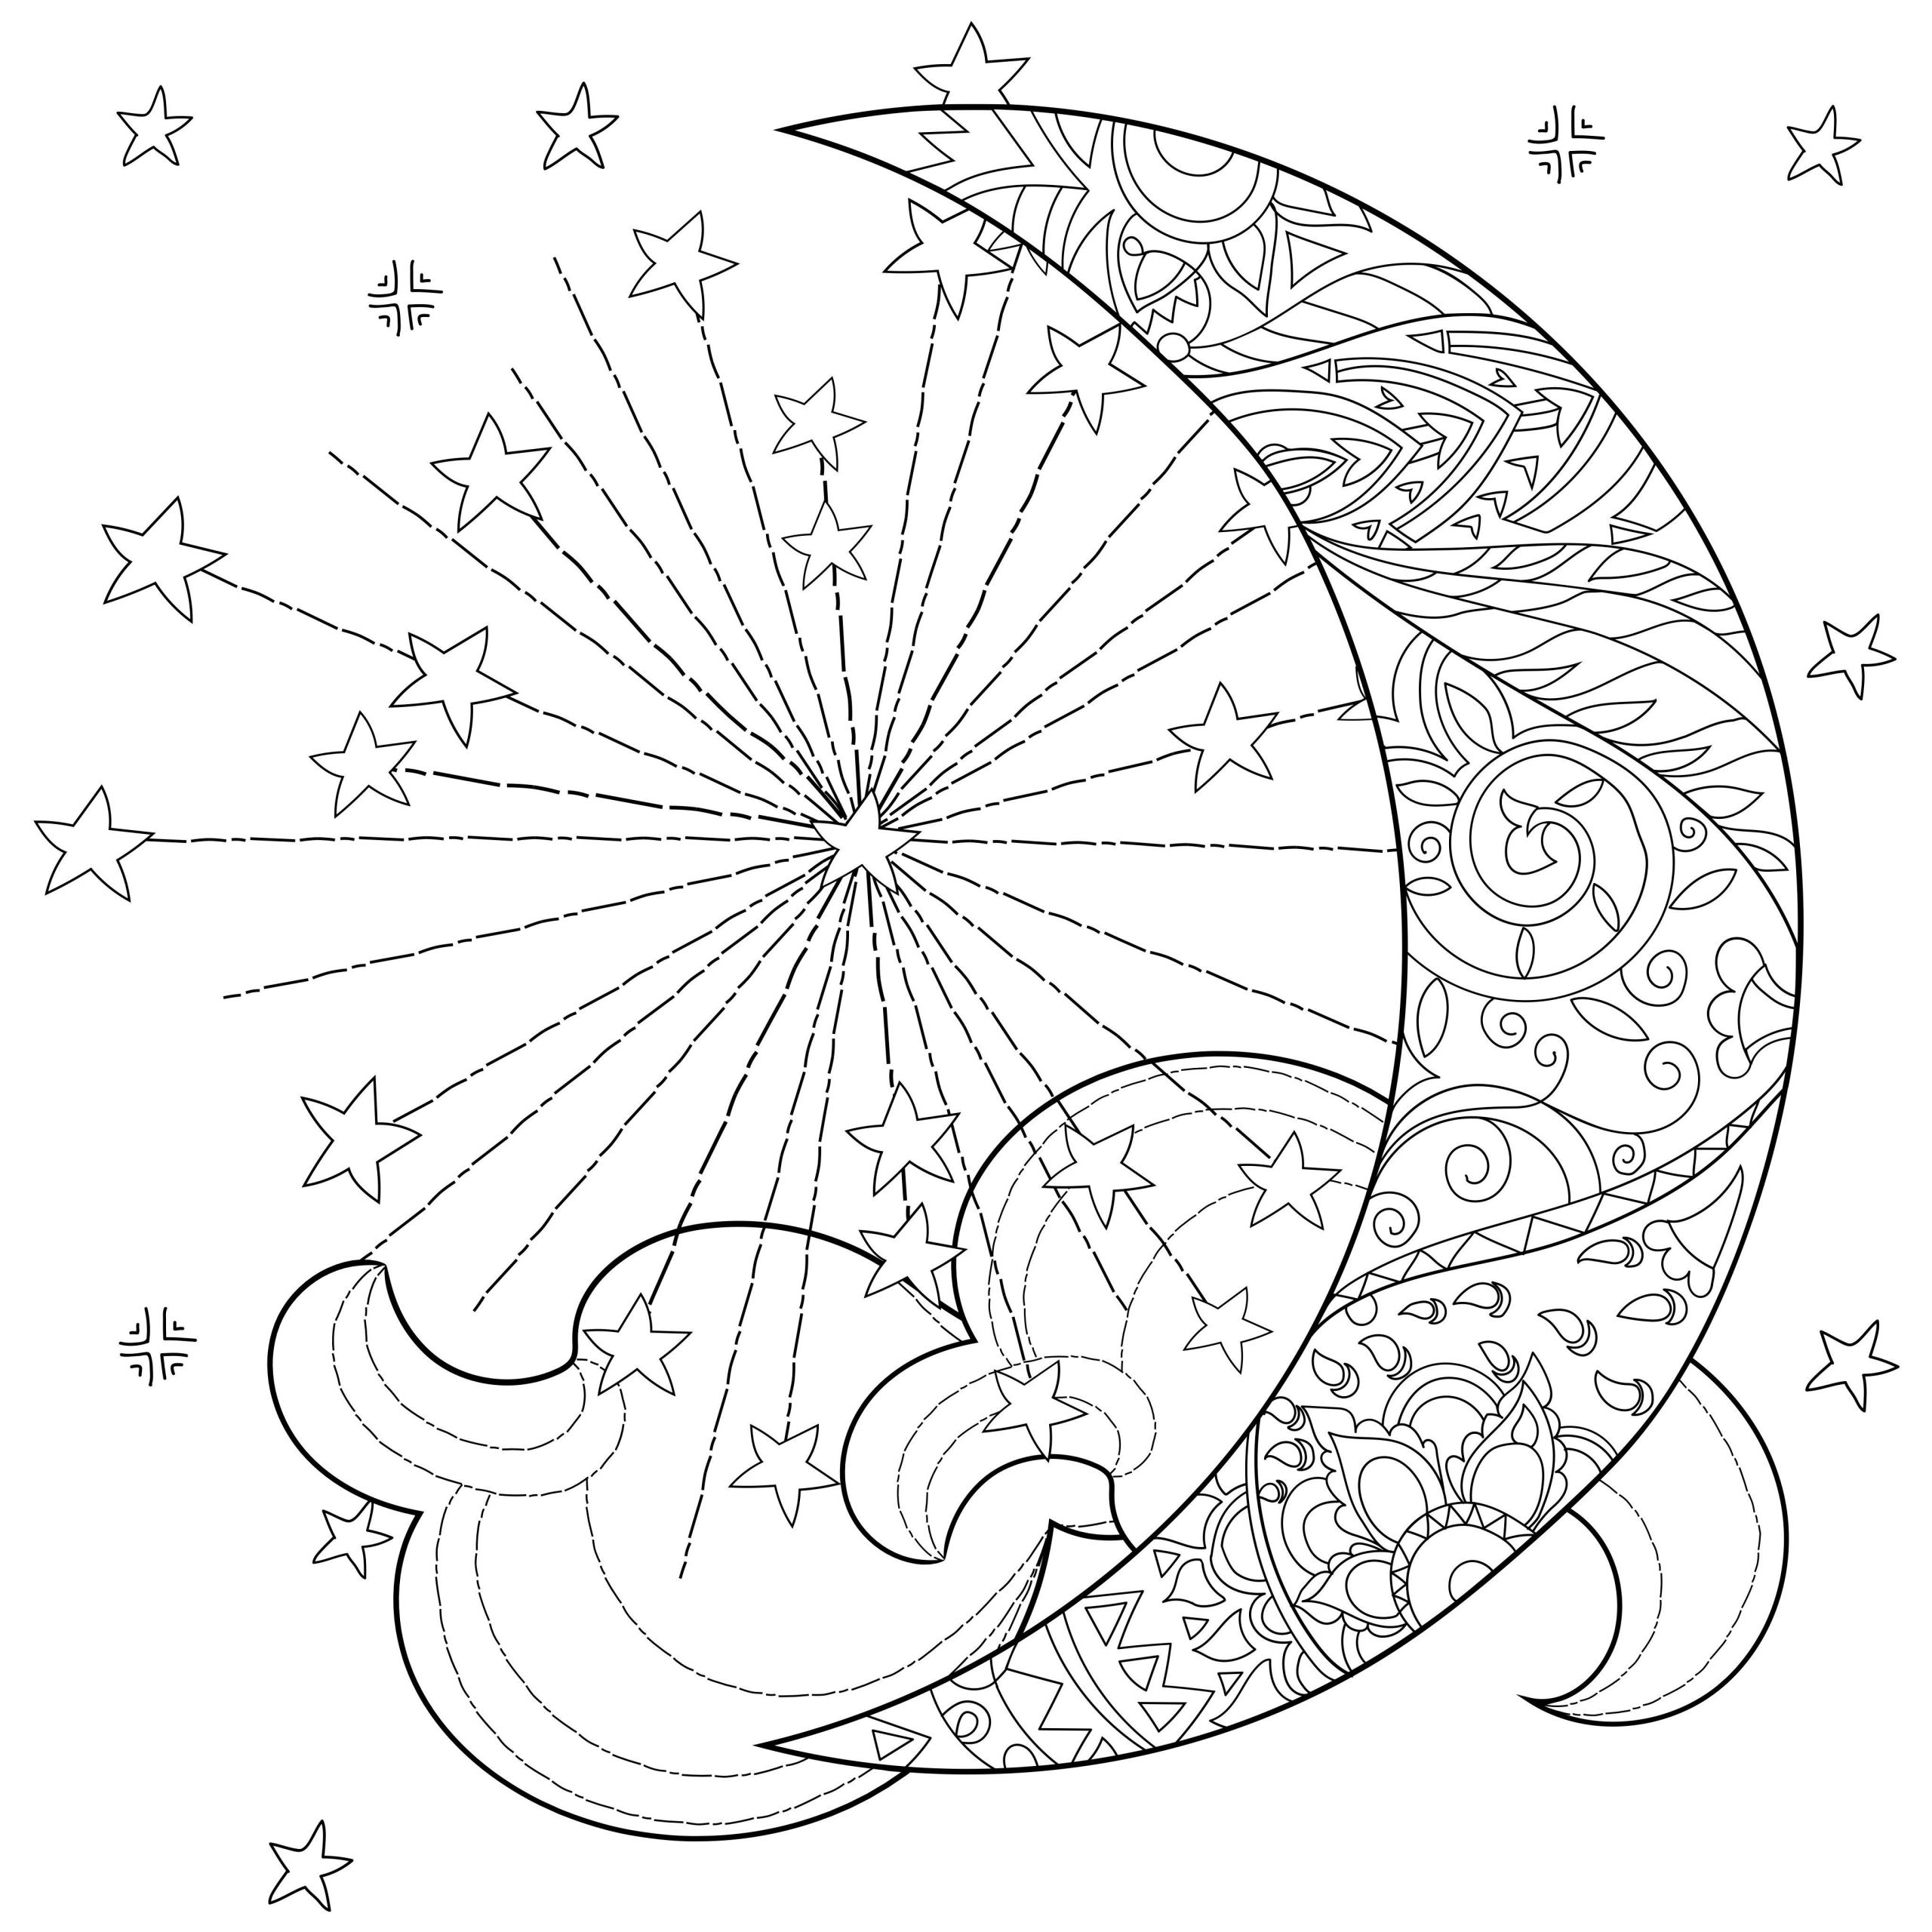 coloring pages : Free Coloring Pages With Quotes Unique Celestial Coloring  Pages Monte Free Coloring Pages with Quotes ~ affiliateprogrambook.com